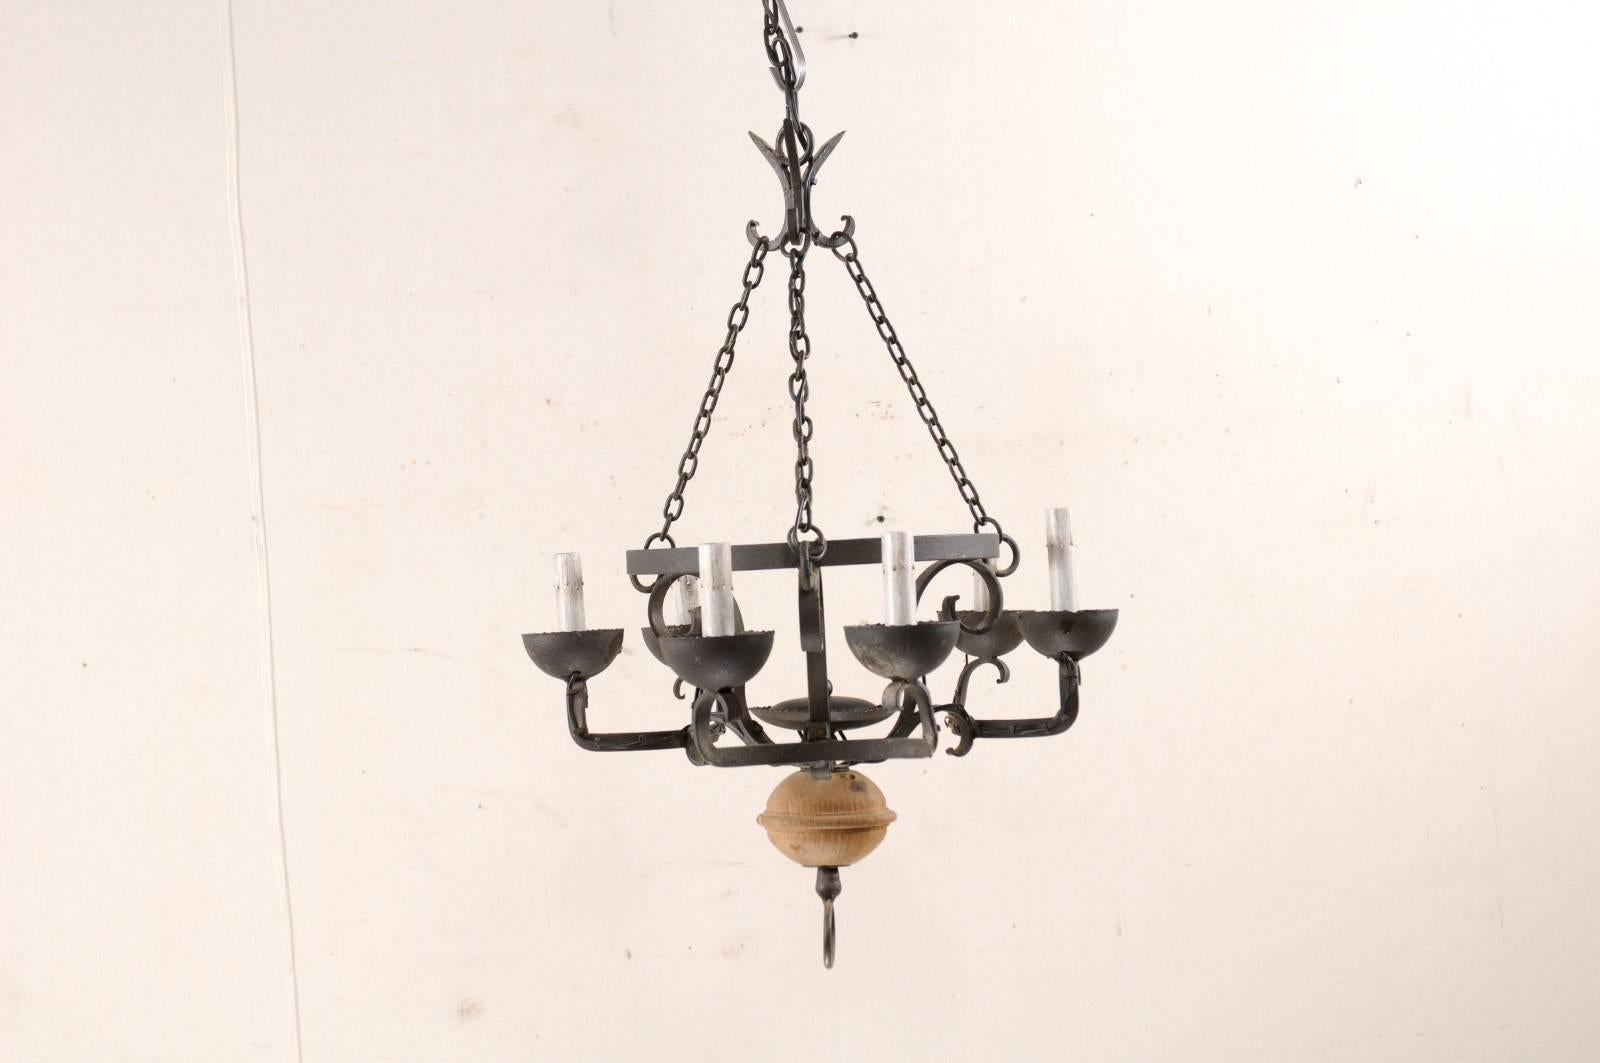 A French forged-iron chandelier with wood ball accent from the mid-20th century. This French vintage chandelier features a black iron basket-shaped center, nicely contrasted with a natural wooden orb at it's lower base, and iron o-ring finial at the